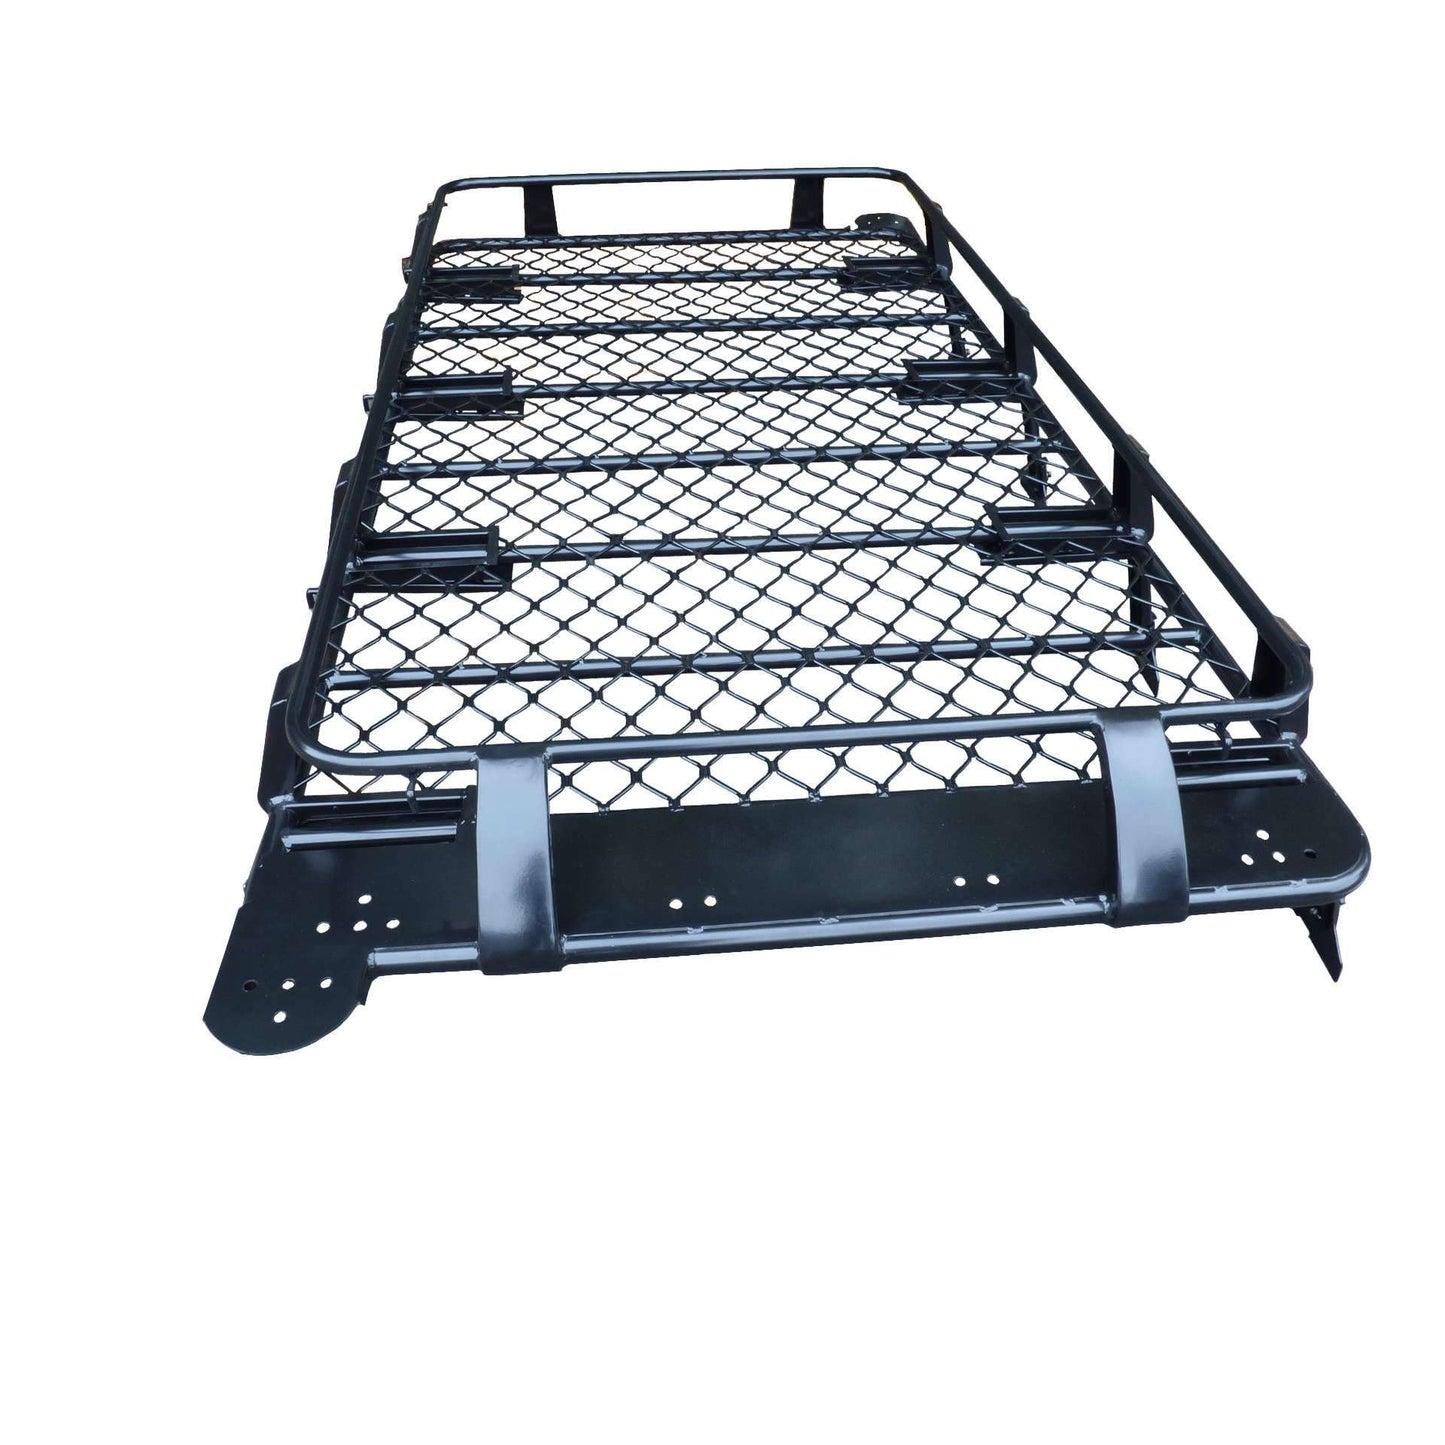 Expedition Aluminium Full Basket Roof Rack for Jeep Cherokee XJ 1983-2001